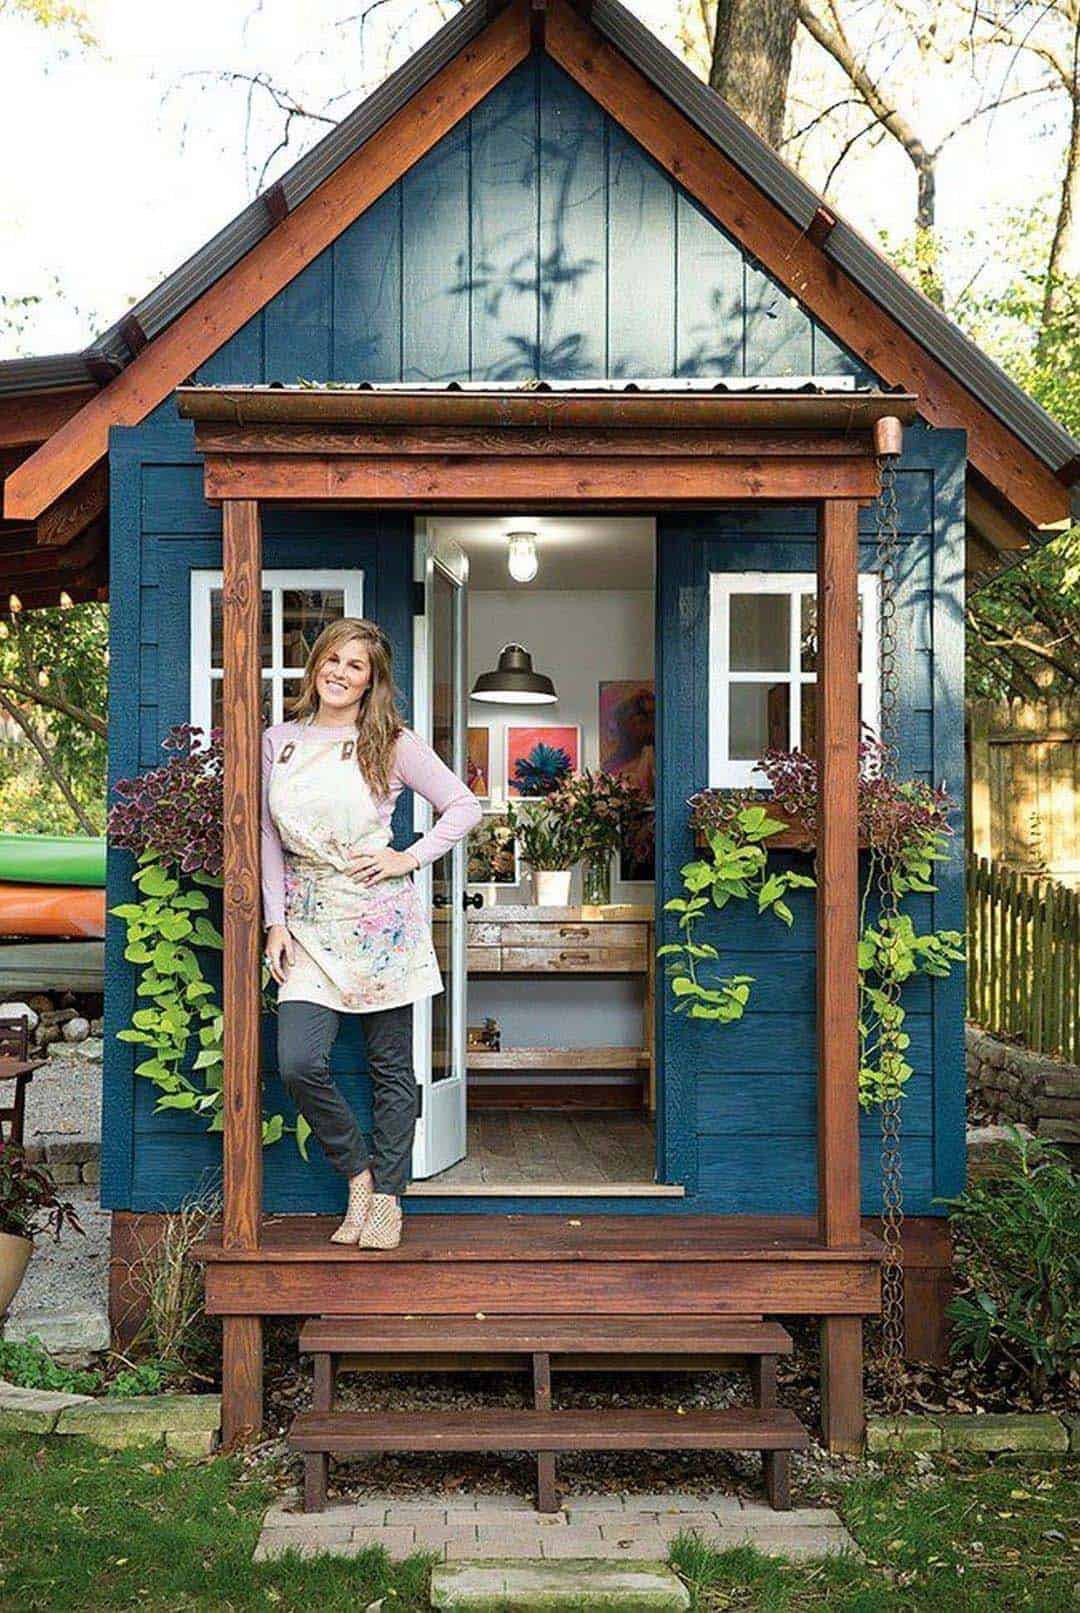 Sheds For Backyard
 30 Wonderfully Inspiring She Shed Ideas To Adorn Your